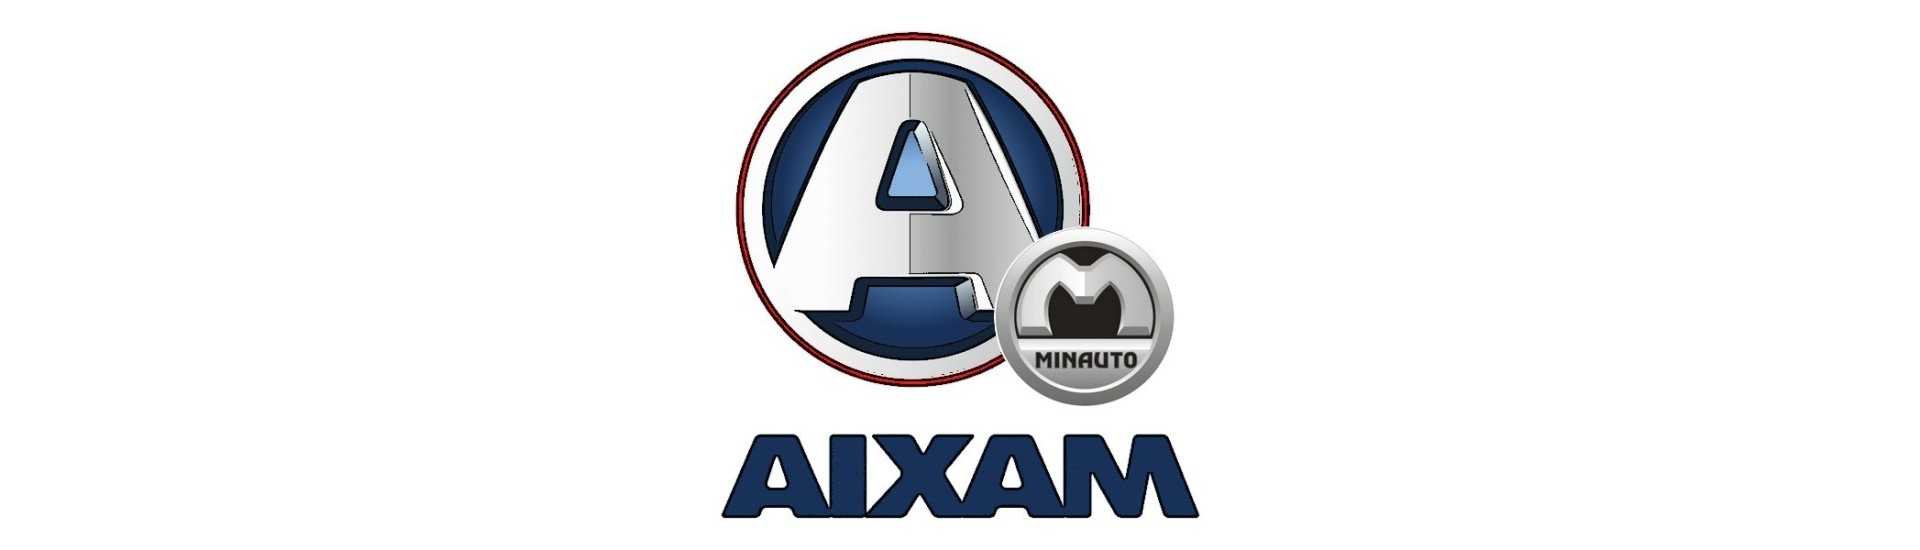 Lighthouse at the best price for car without a permit Aixam Minauto